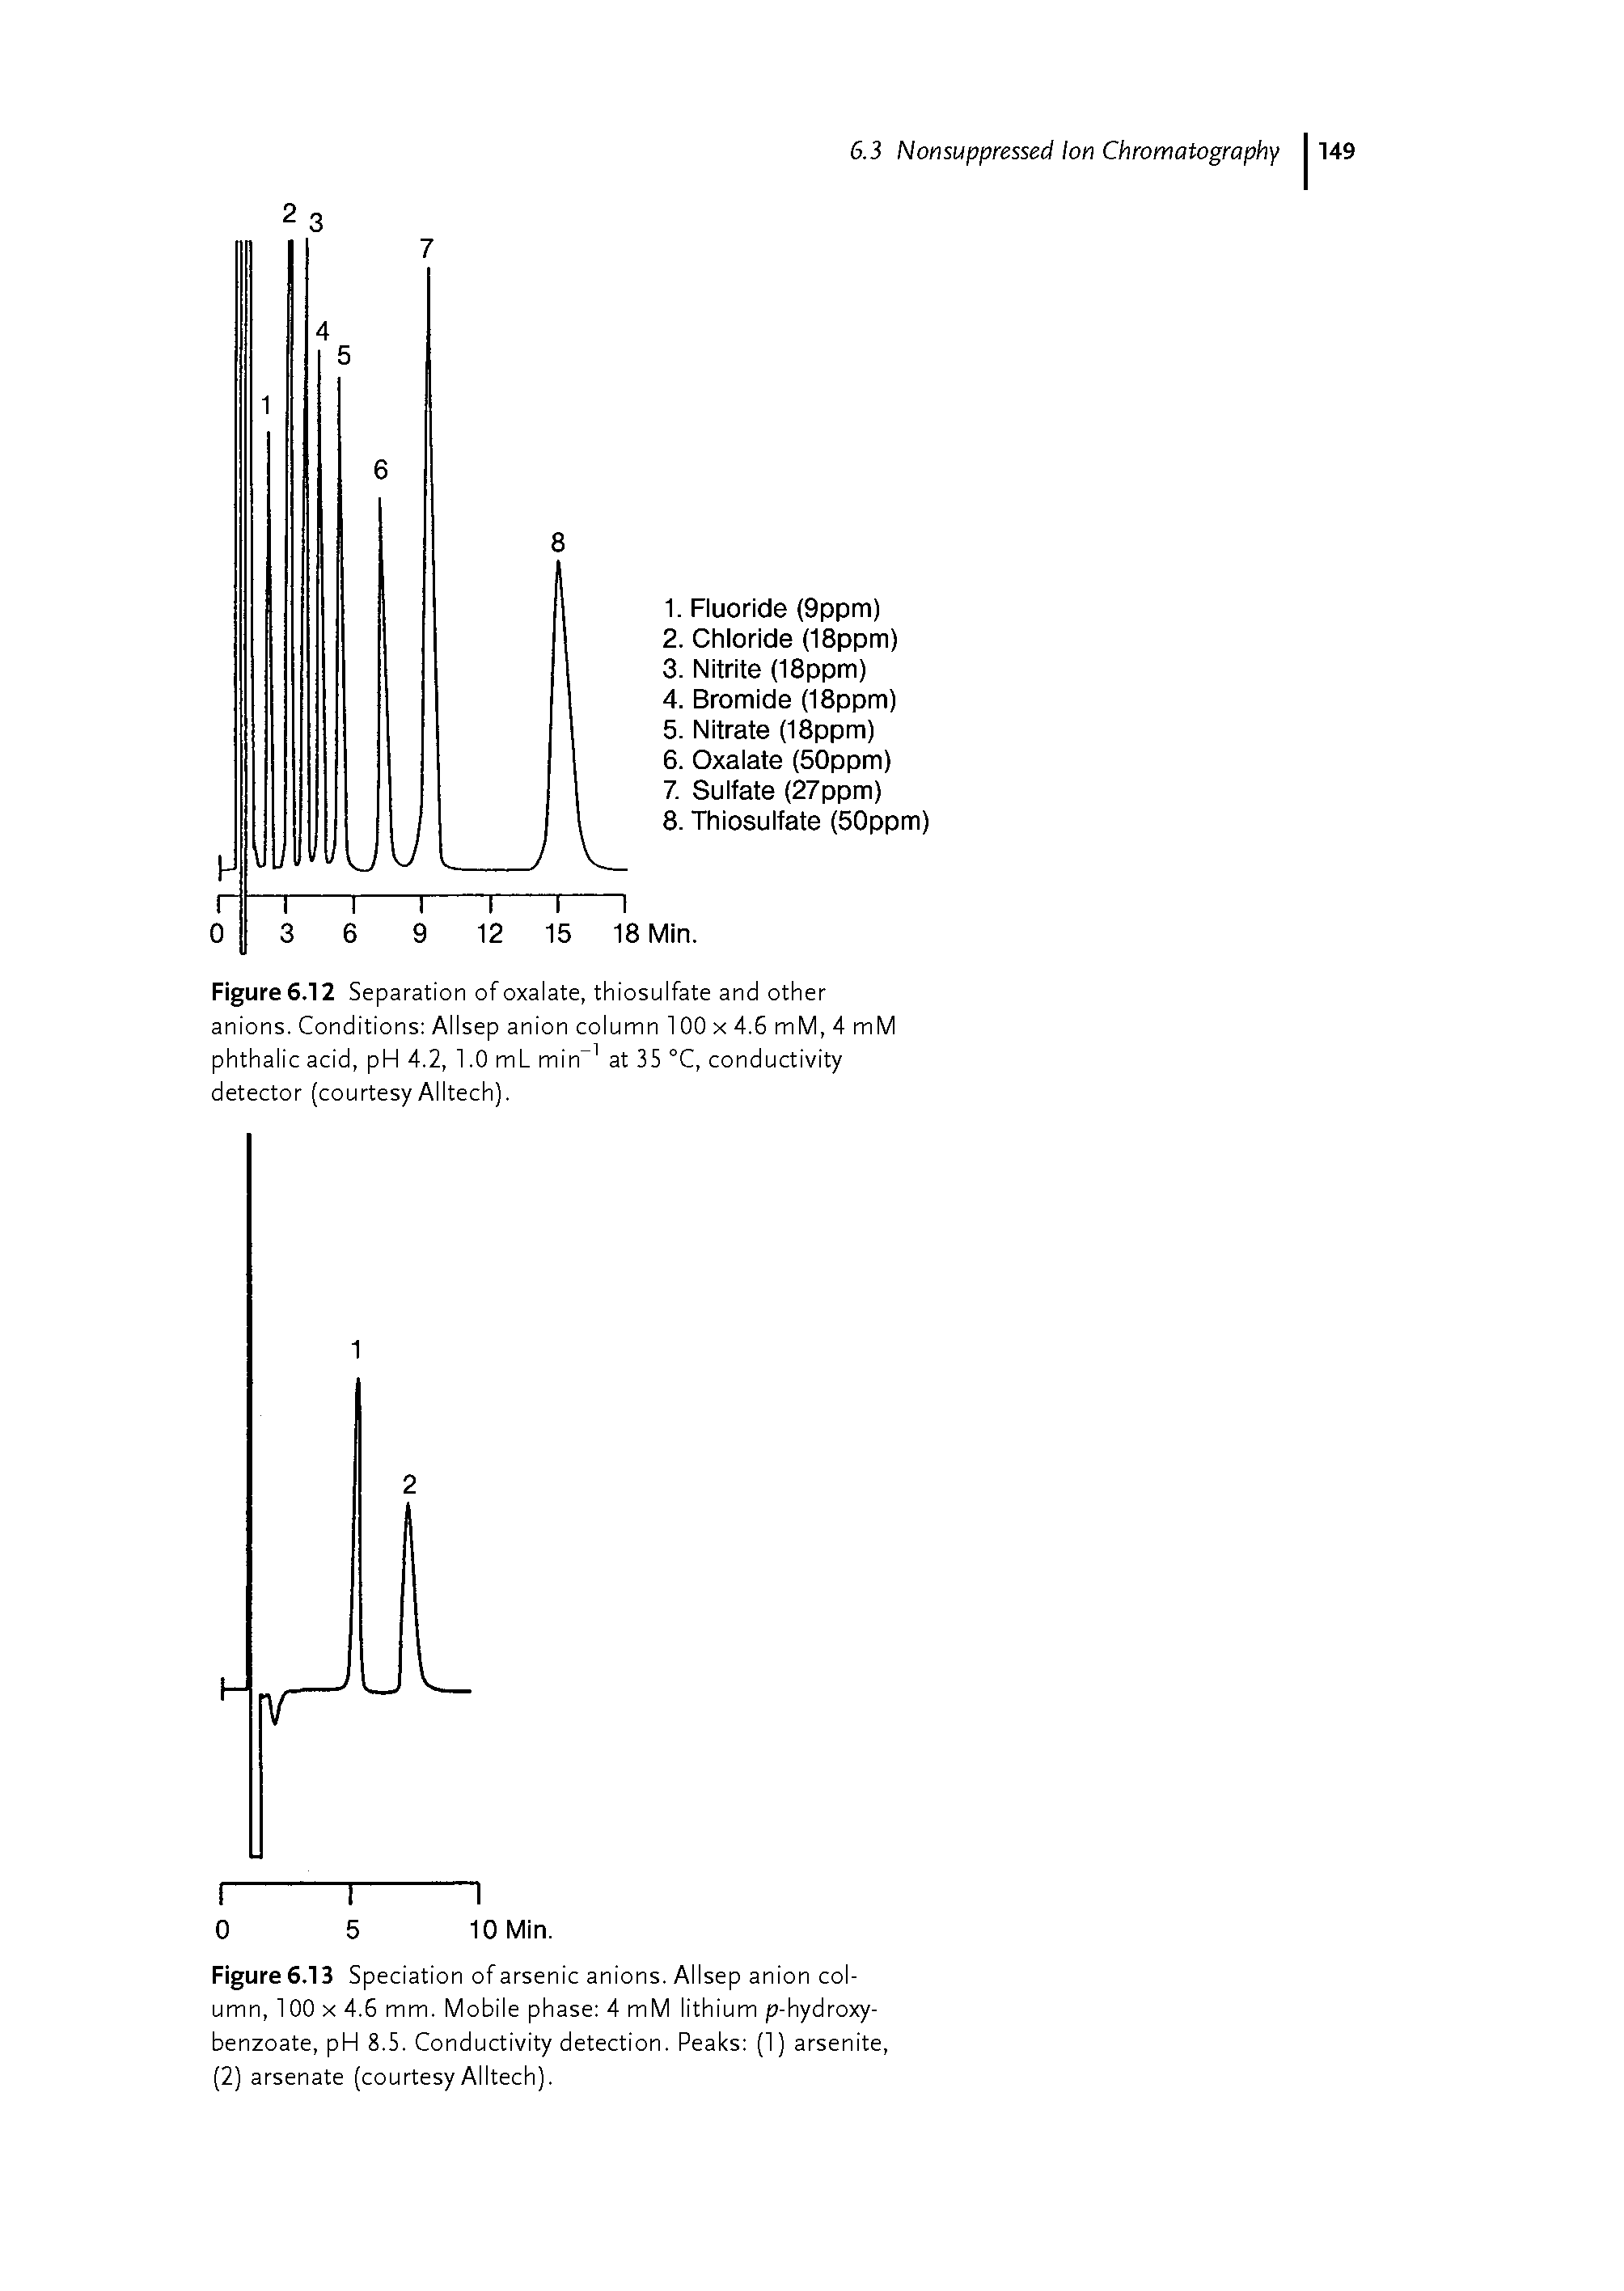 Figure 6.13 Speciation of arsenic anions. Allsep anion column, 100x4.5 mm. Mobile phase 4 mM lithium p-hydroxy-benzoate, pH 8.5. Conductivity detection. Peaks (1) arsenite, (2) arsenate (courtesy Alltech).